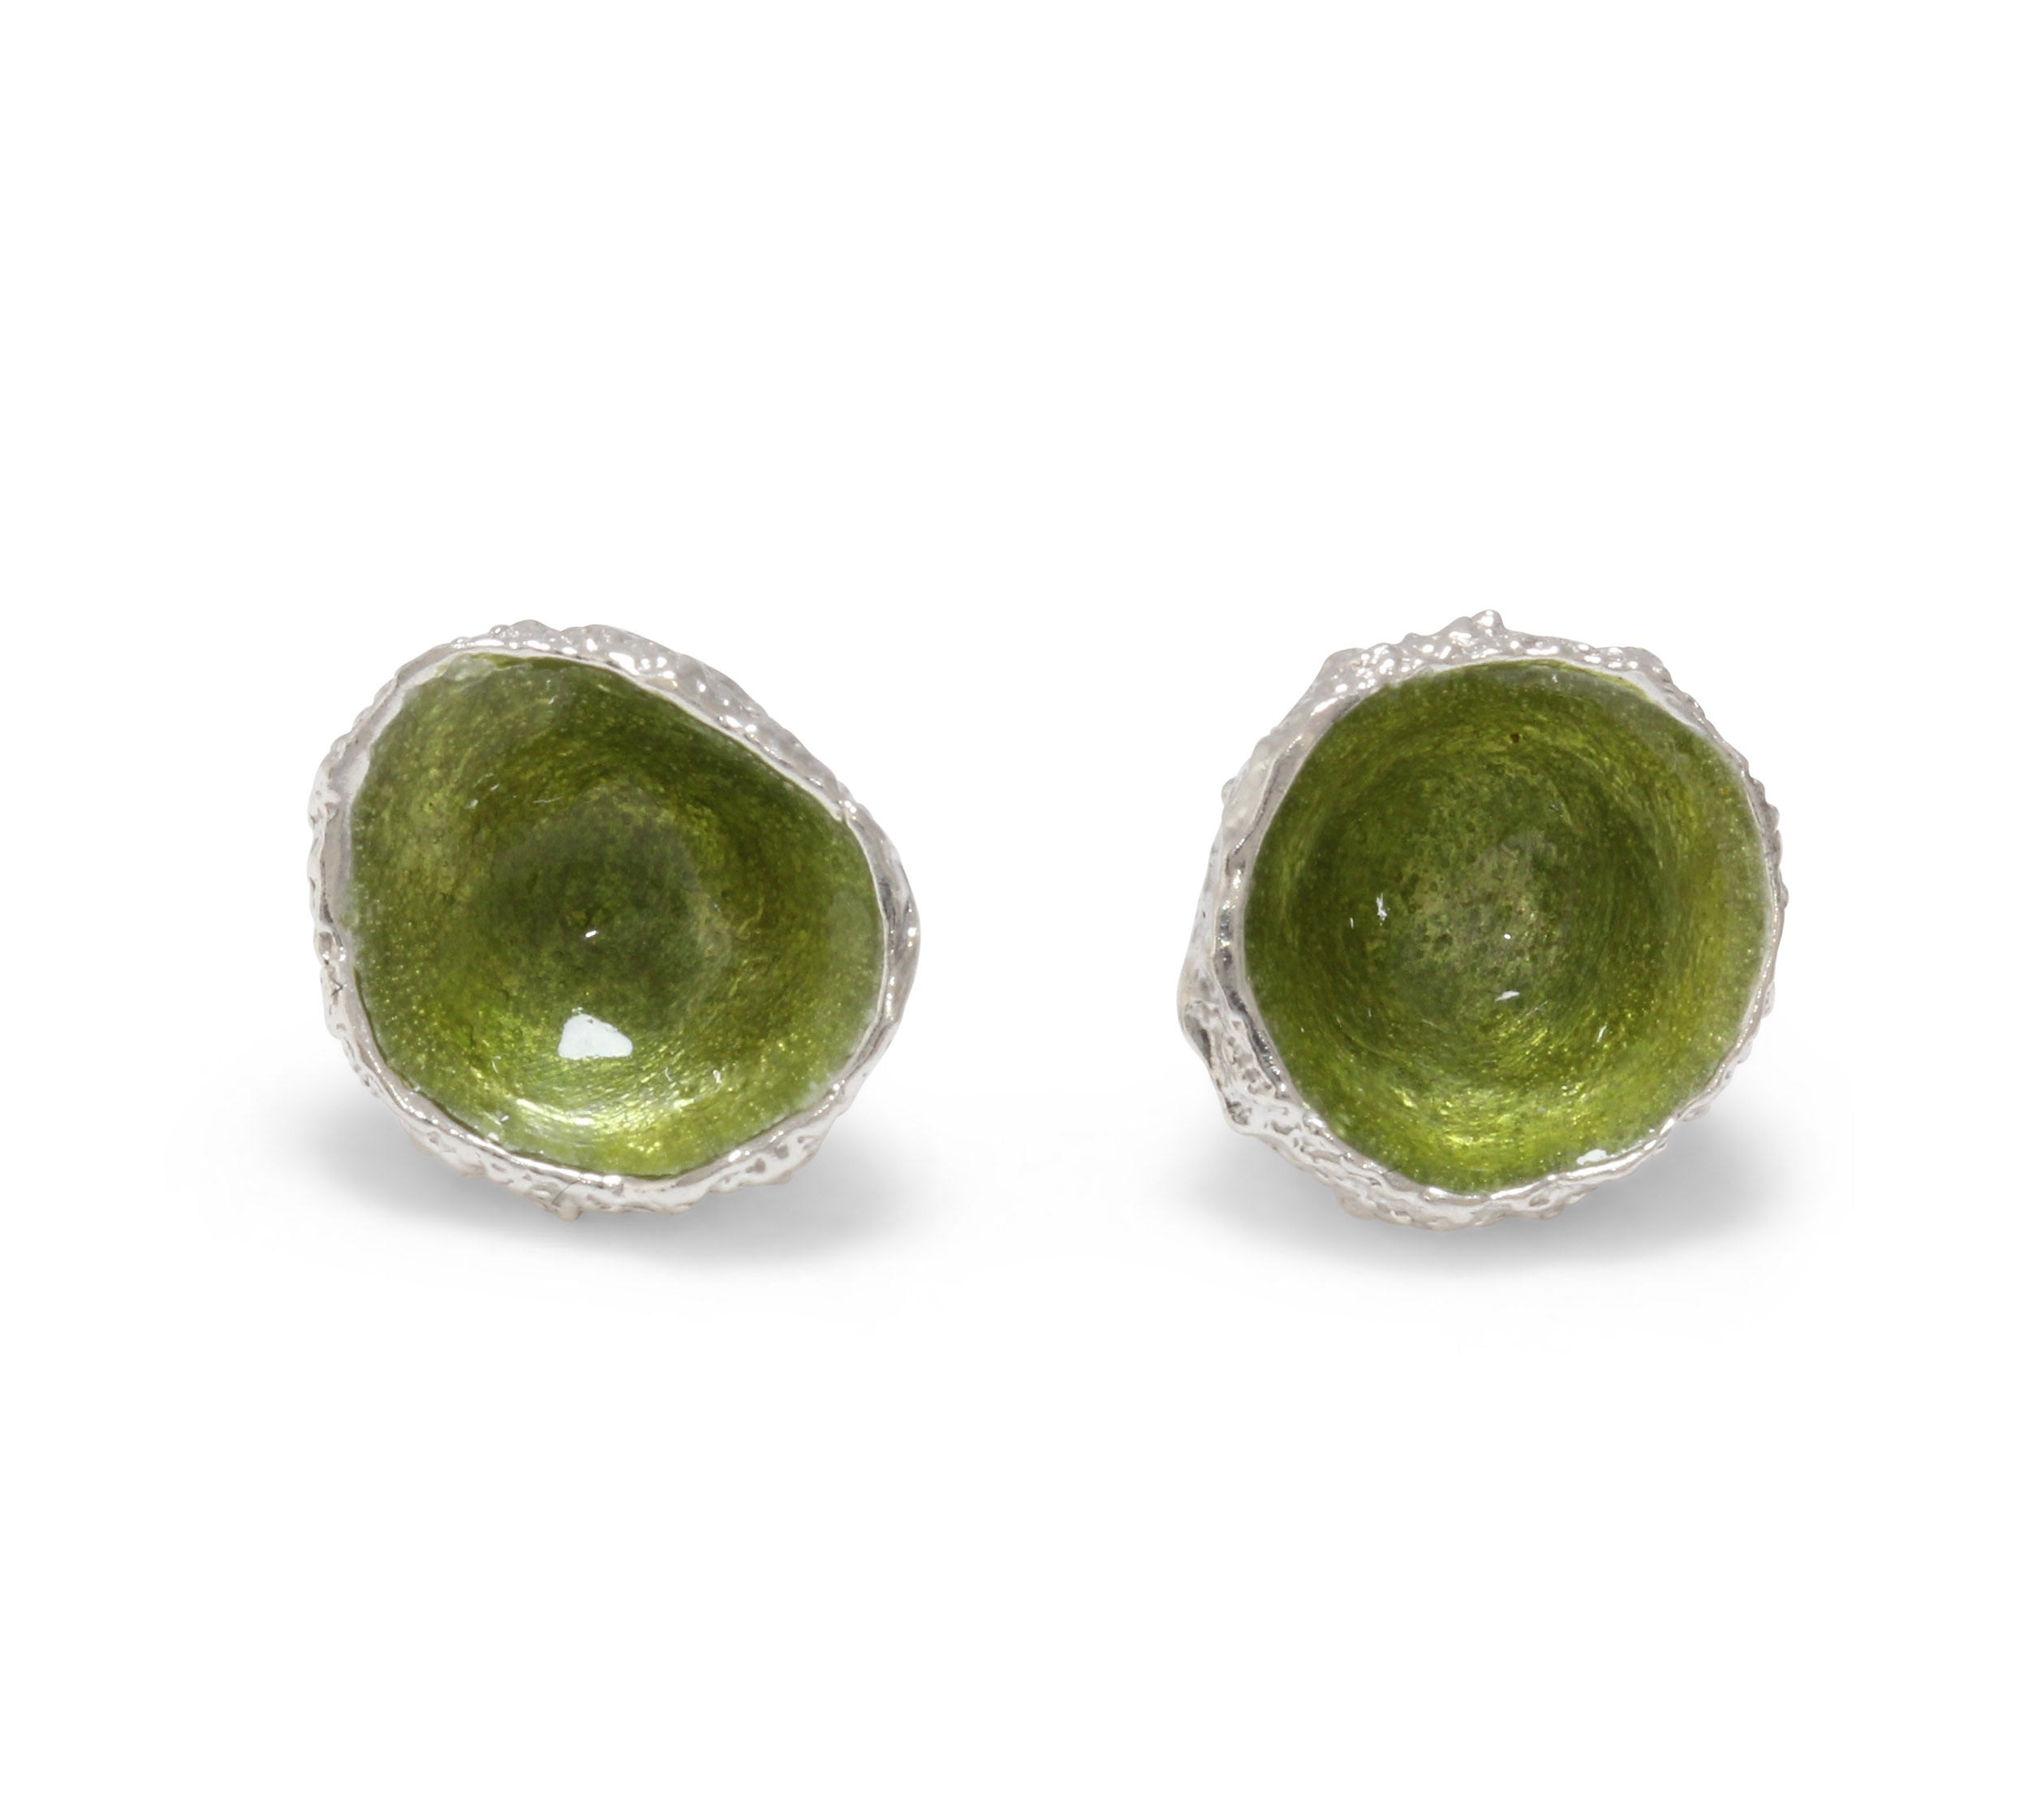 Earrings cast from little acorns into silver. Enamelled with olive green enamel like river weed